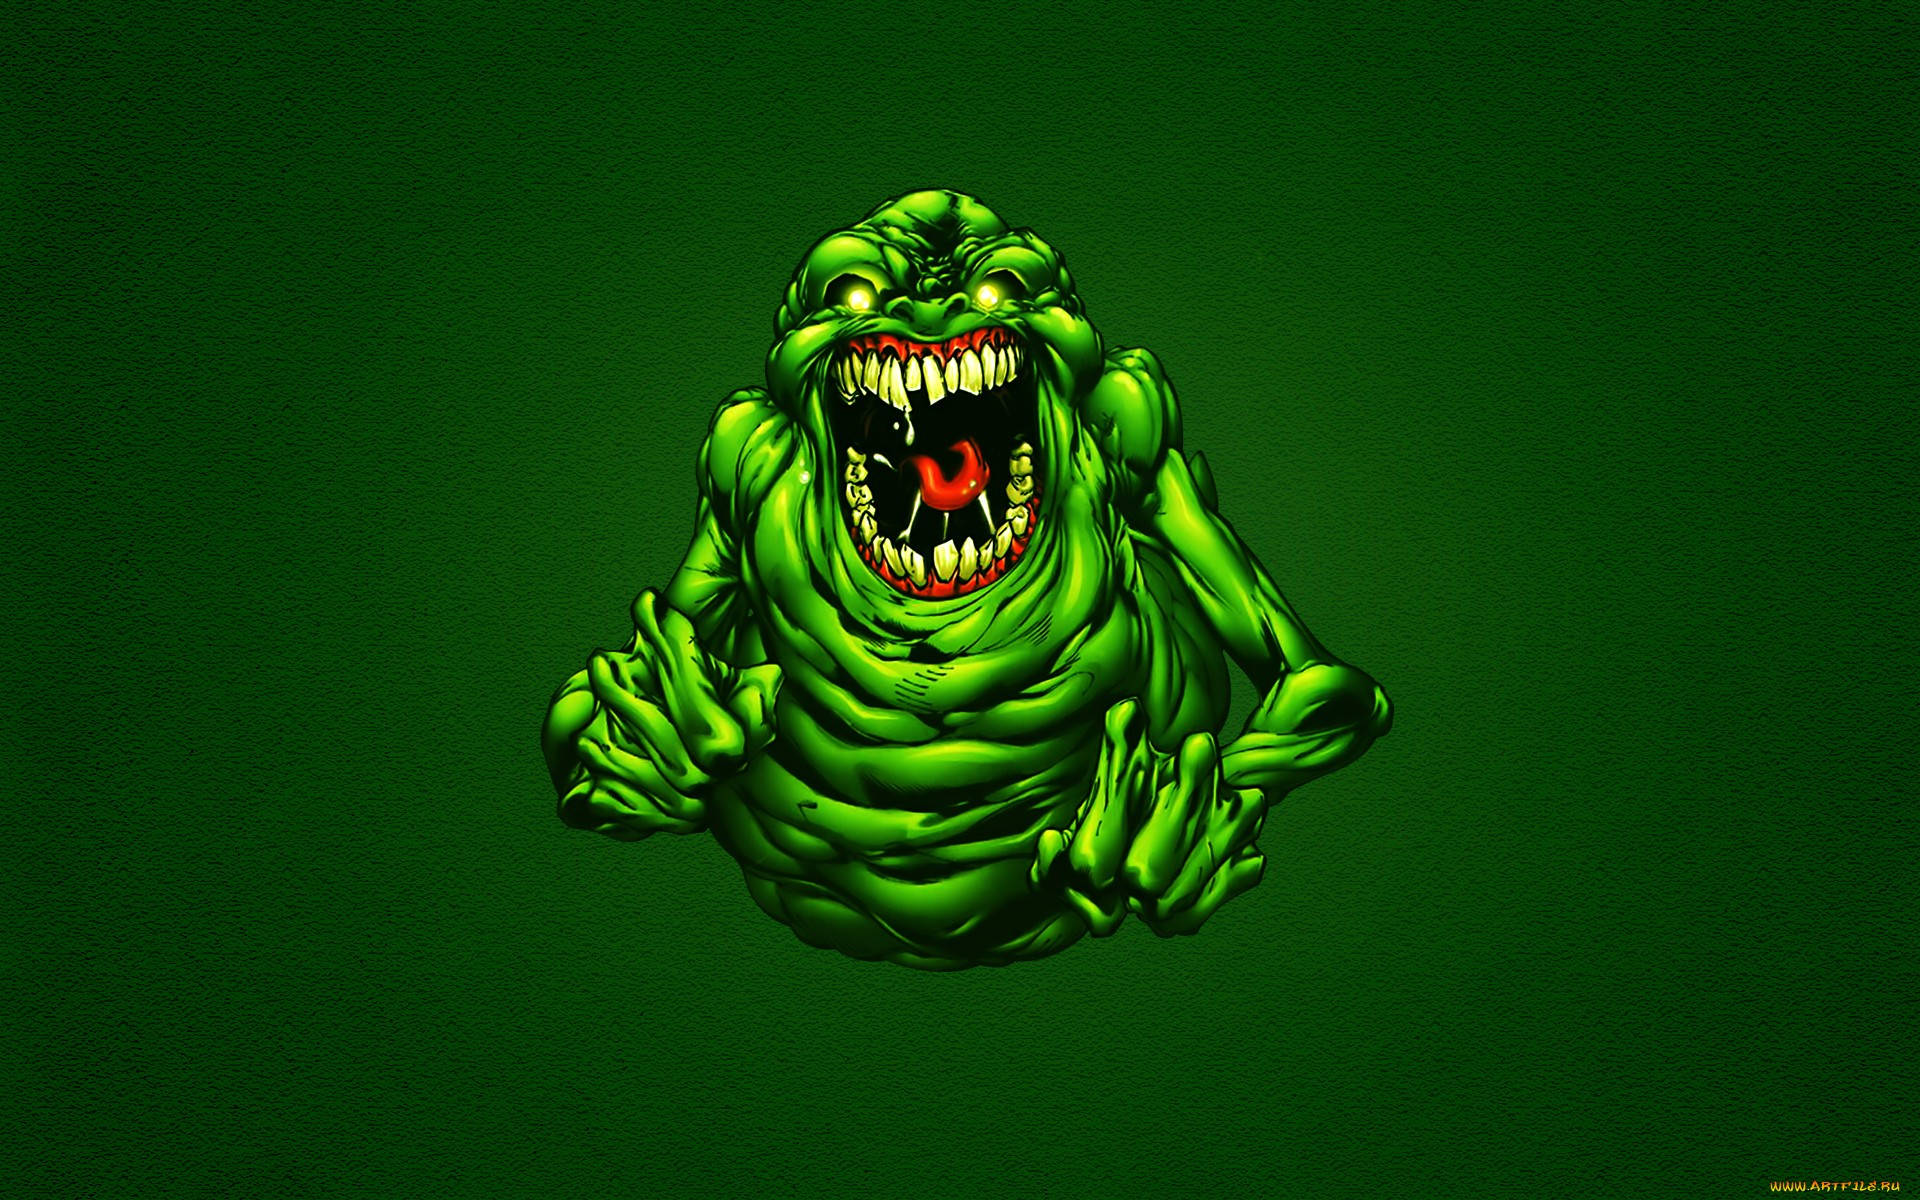 Slimer, The Iconic Green Ghost From Ghostbusters, Wreaks Havoc! Background